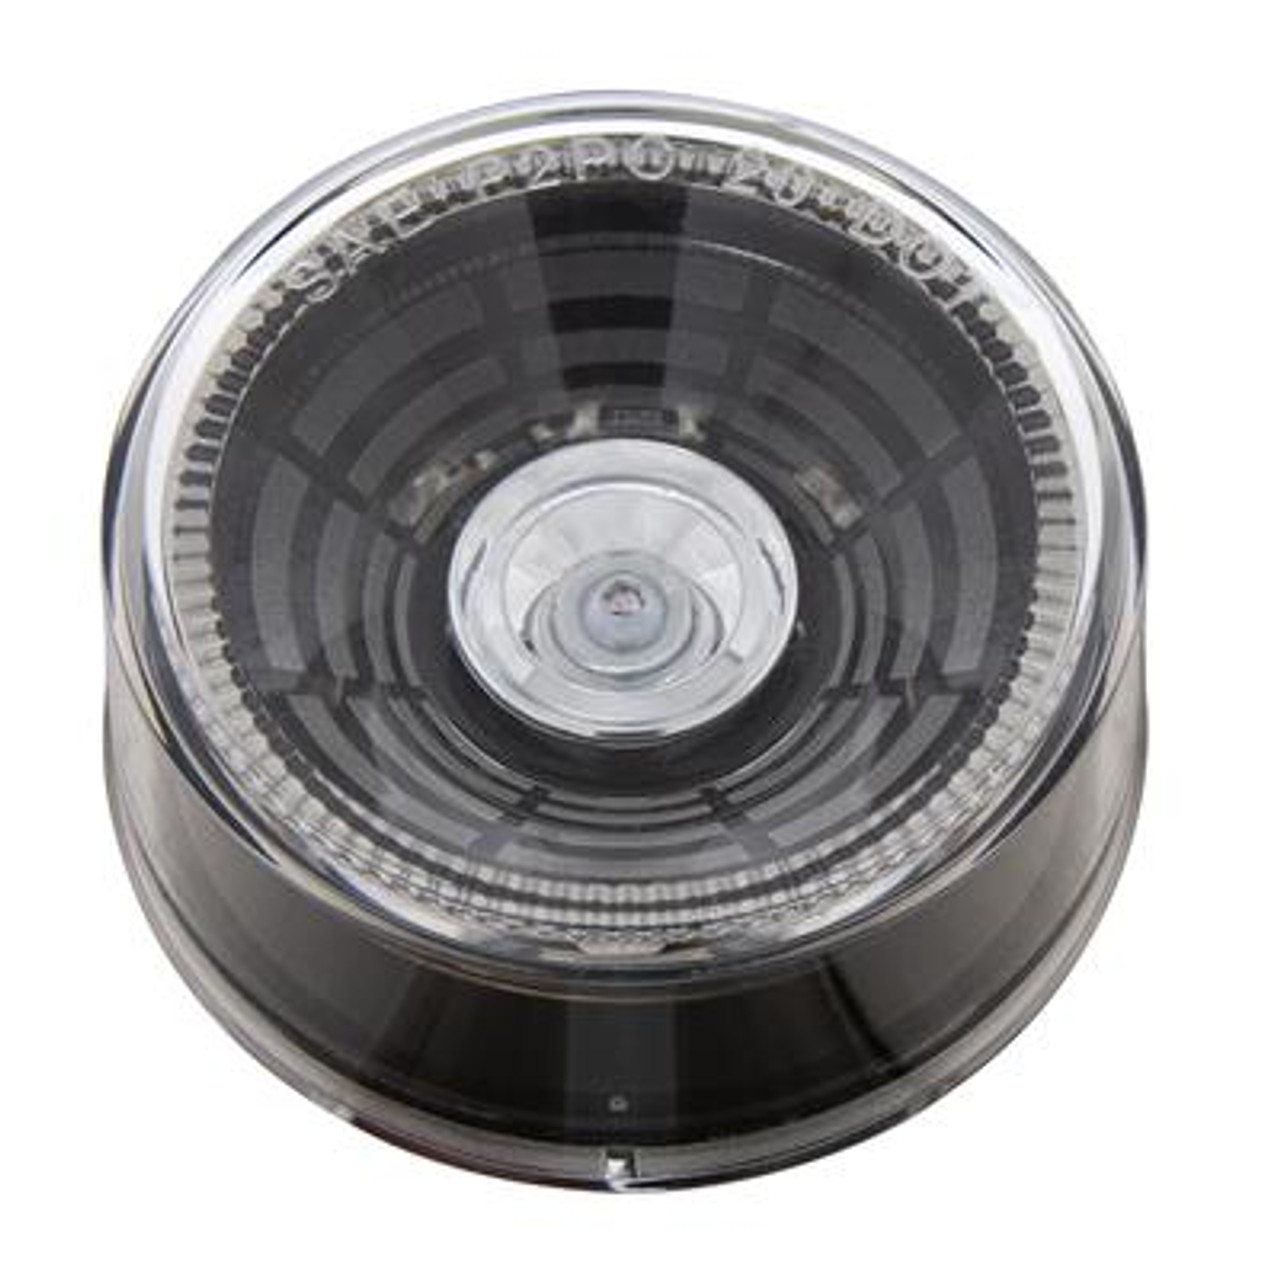 4 LED 2-1/2" Round Abyss Light (Clearance/Marker) - Red LED/Clear Lens